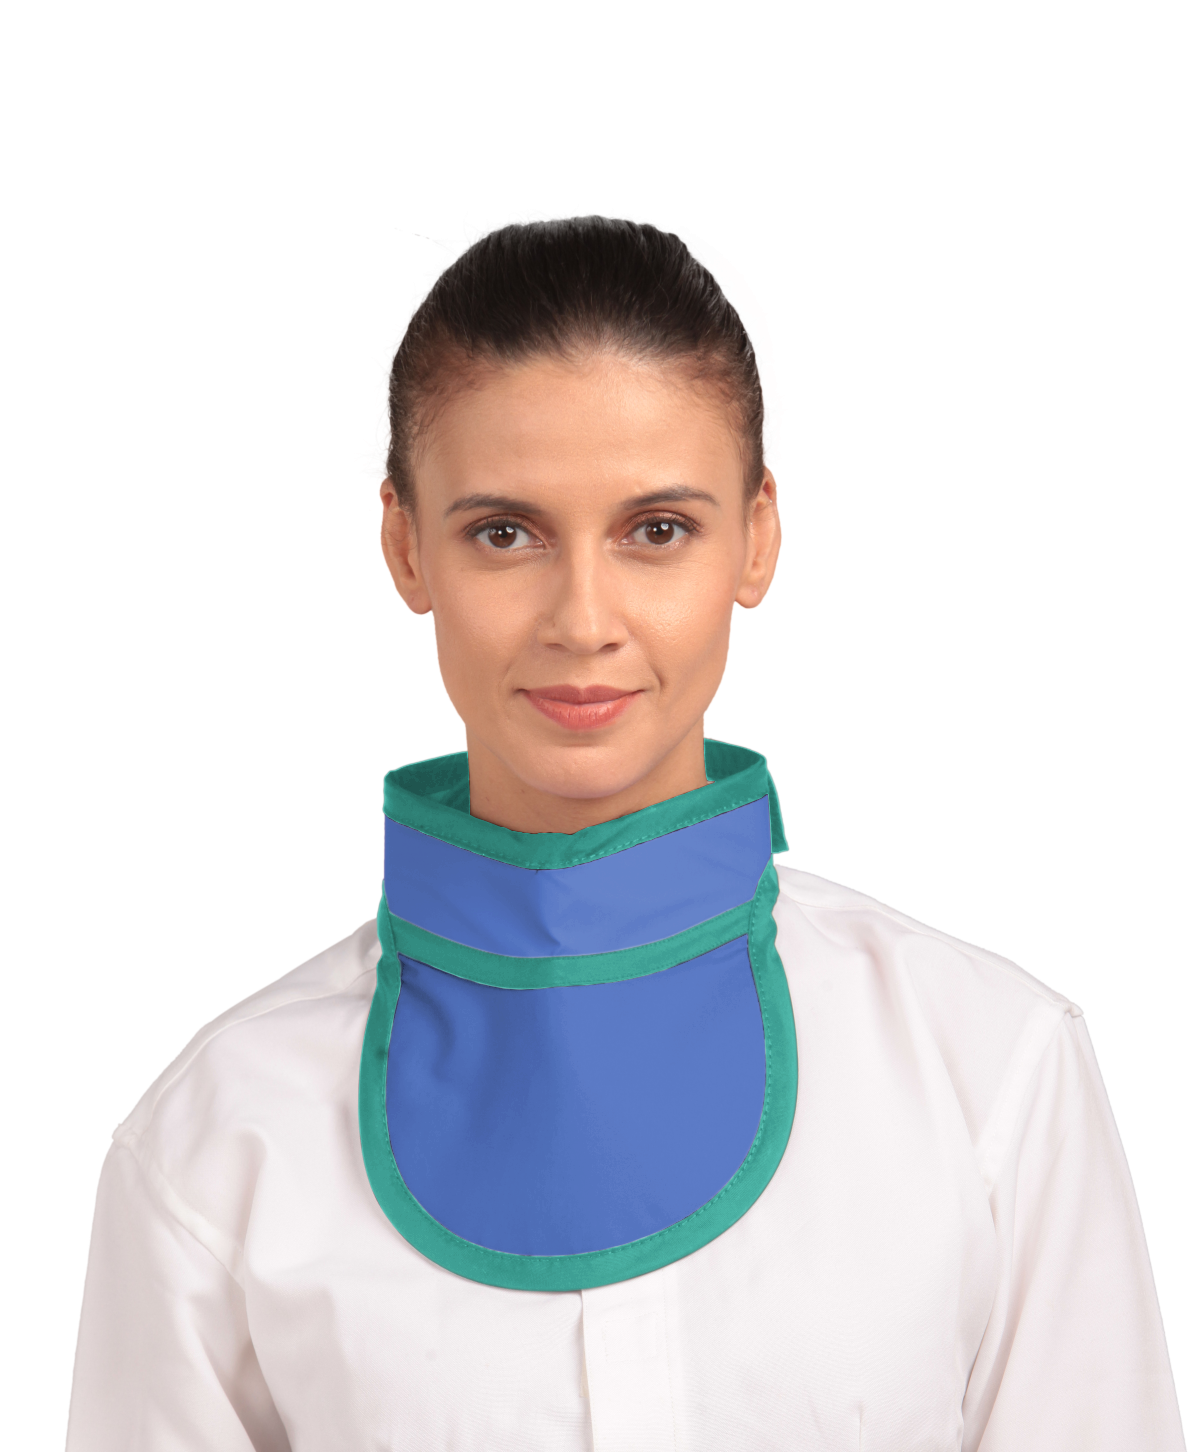 Frontal view of a female model wearing a royal blue thyroid collar “Slim” lined with ocean green color around the outer edges.